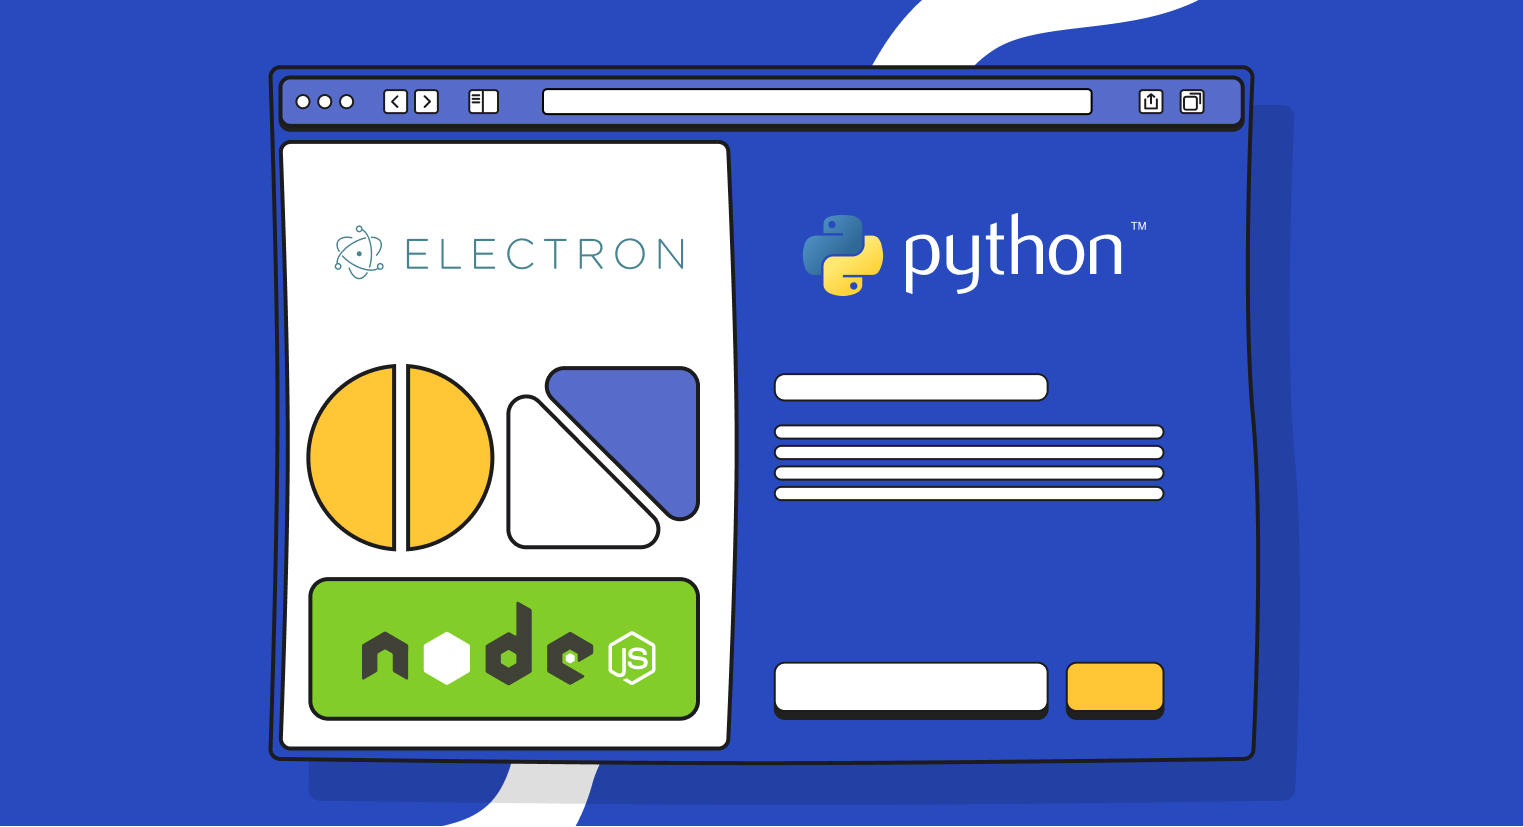 How to Execute Python Scripts in Electron and NodeJS